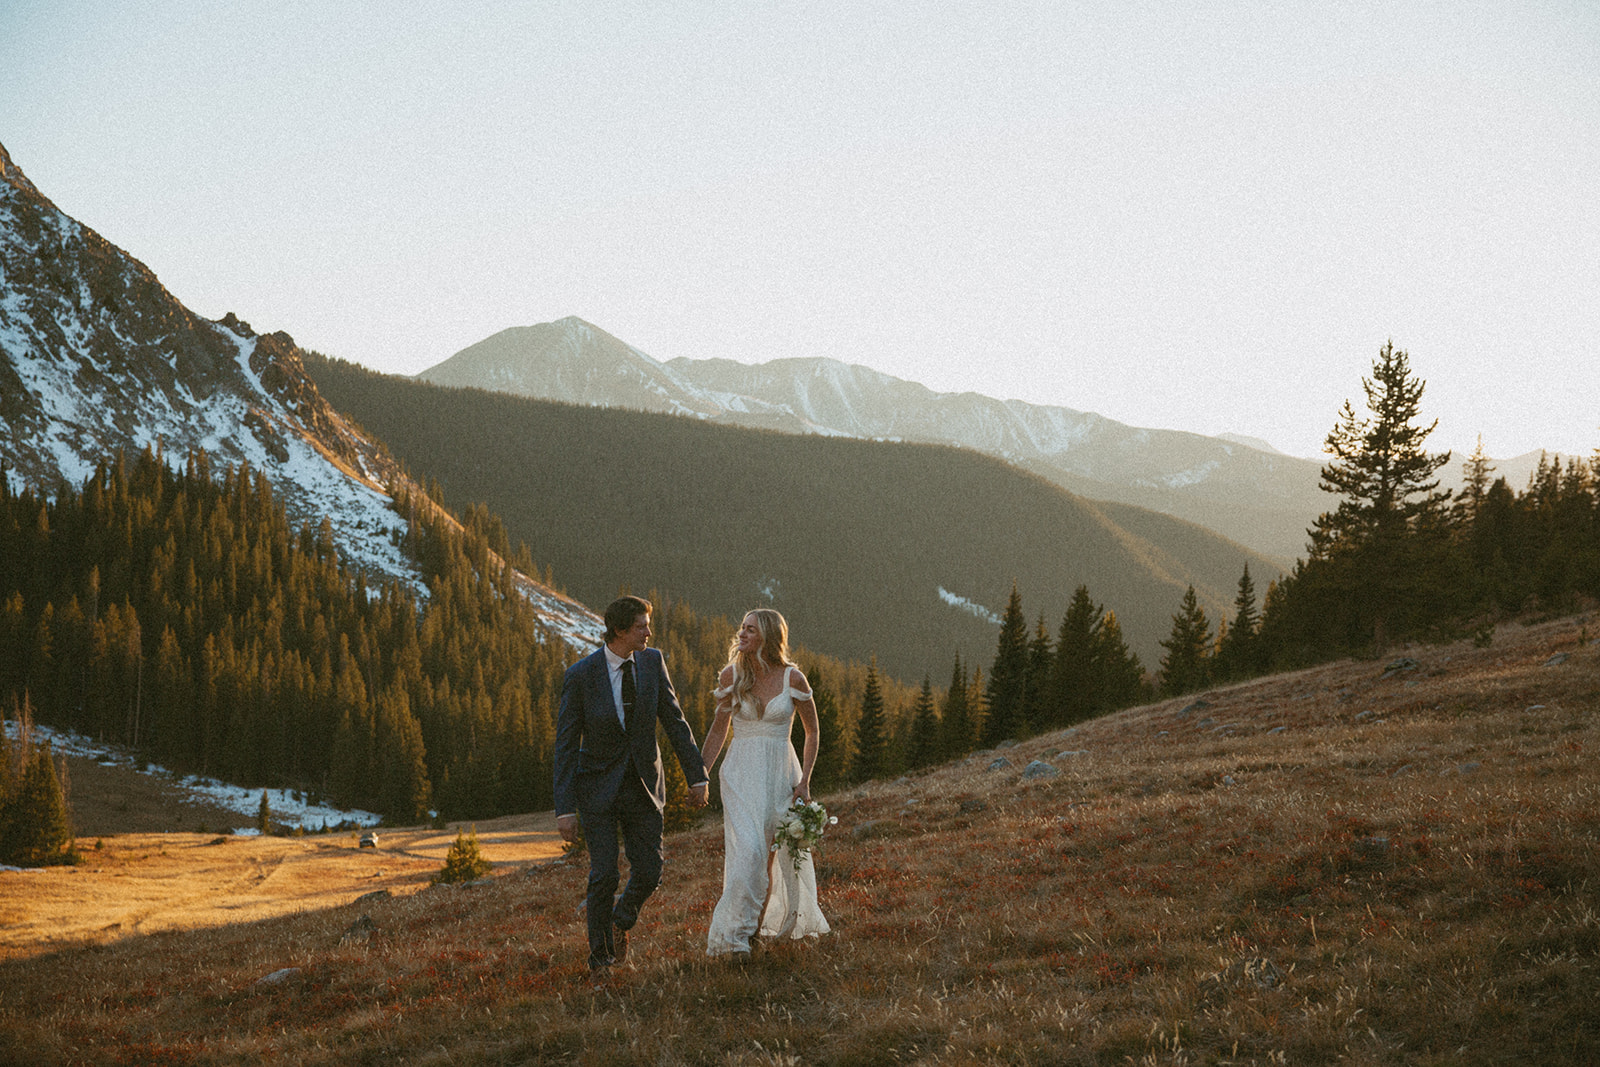 Newlyweds walk hand in hand up a remote hill at sunset during their Colorado Helicopter Wedding